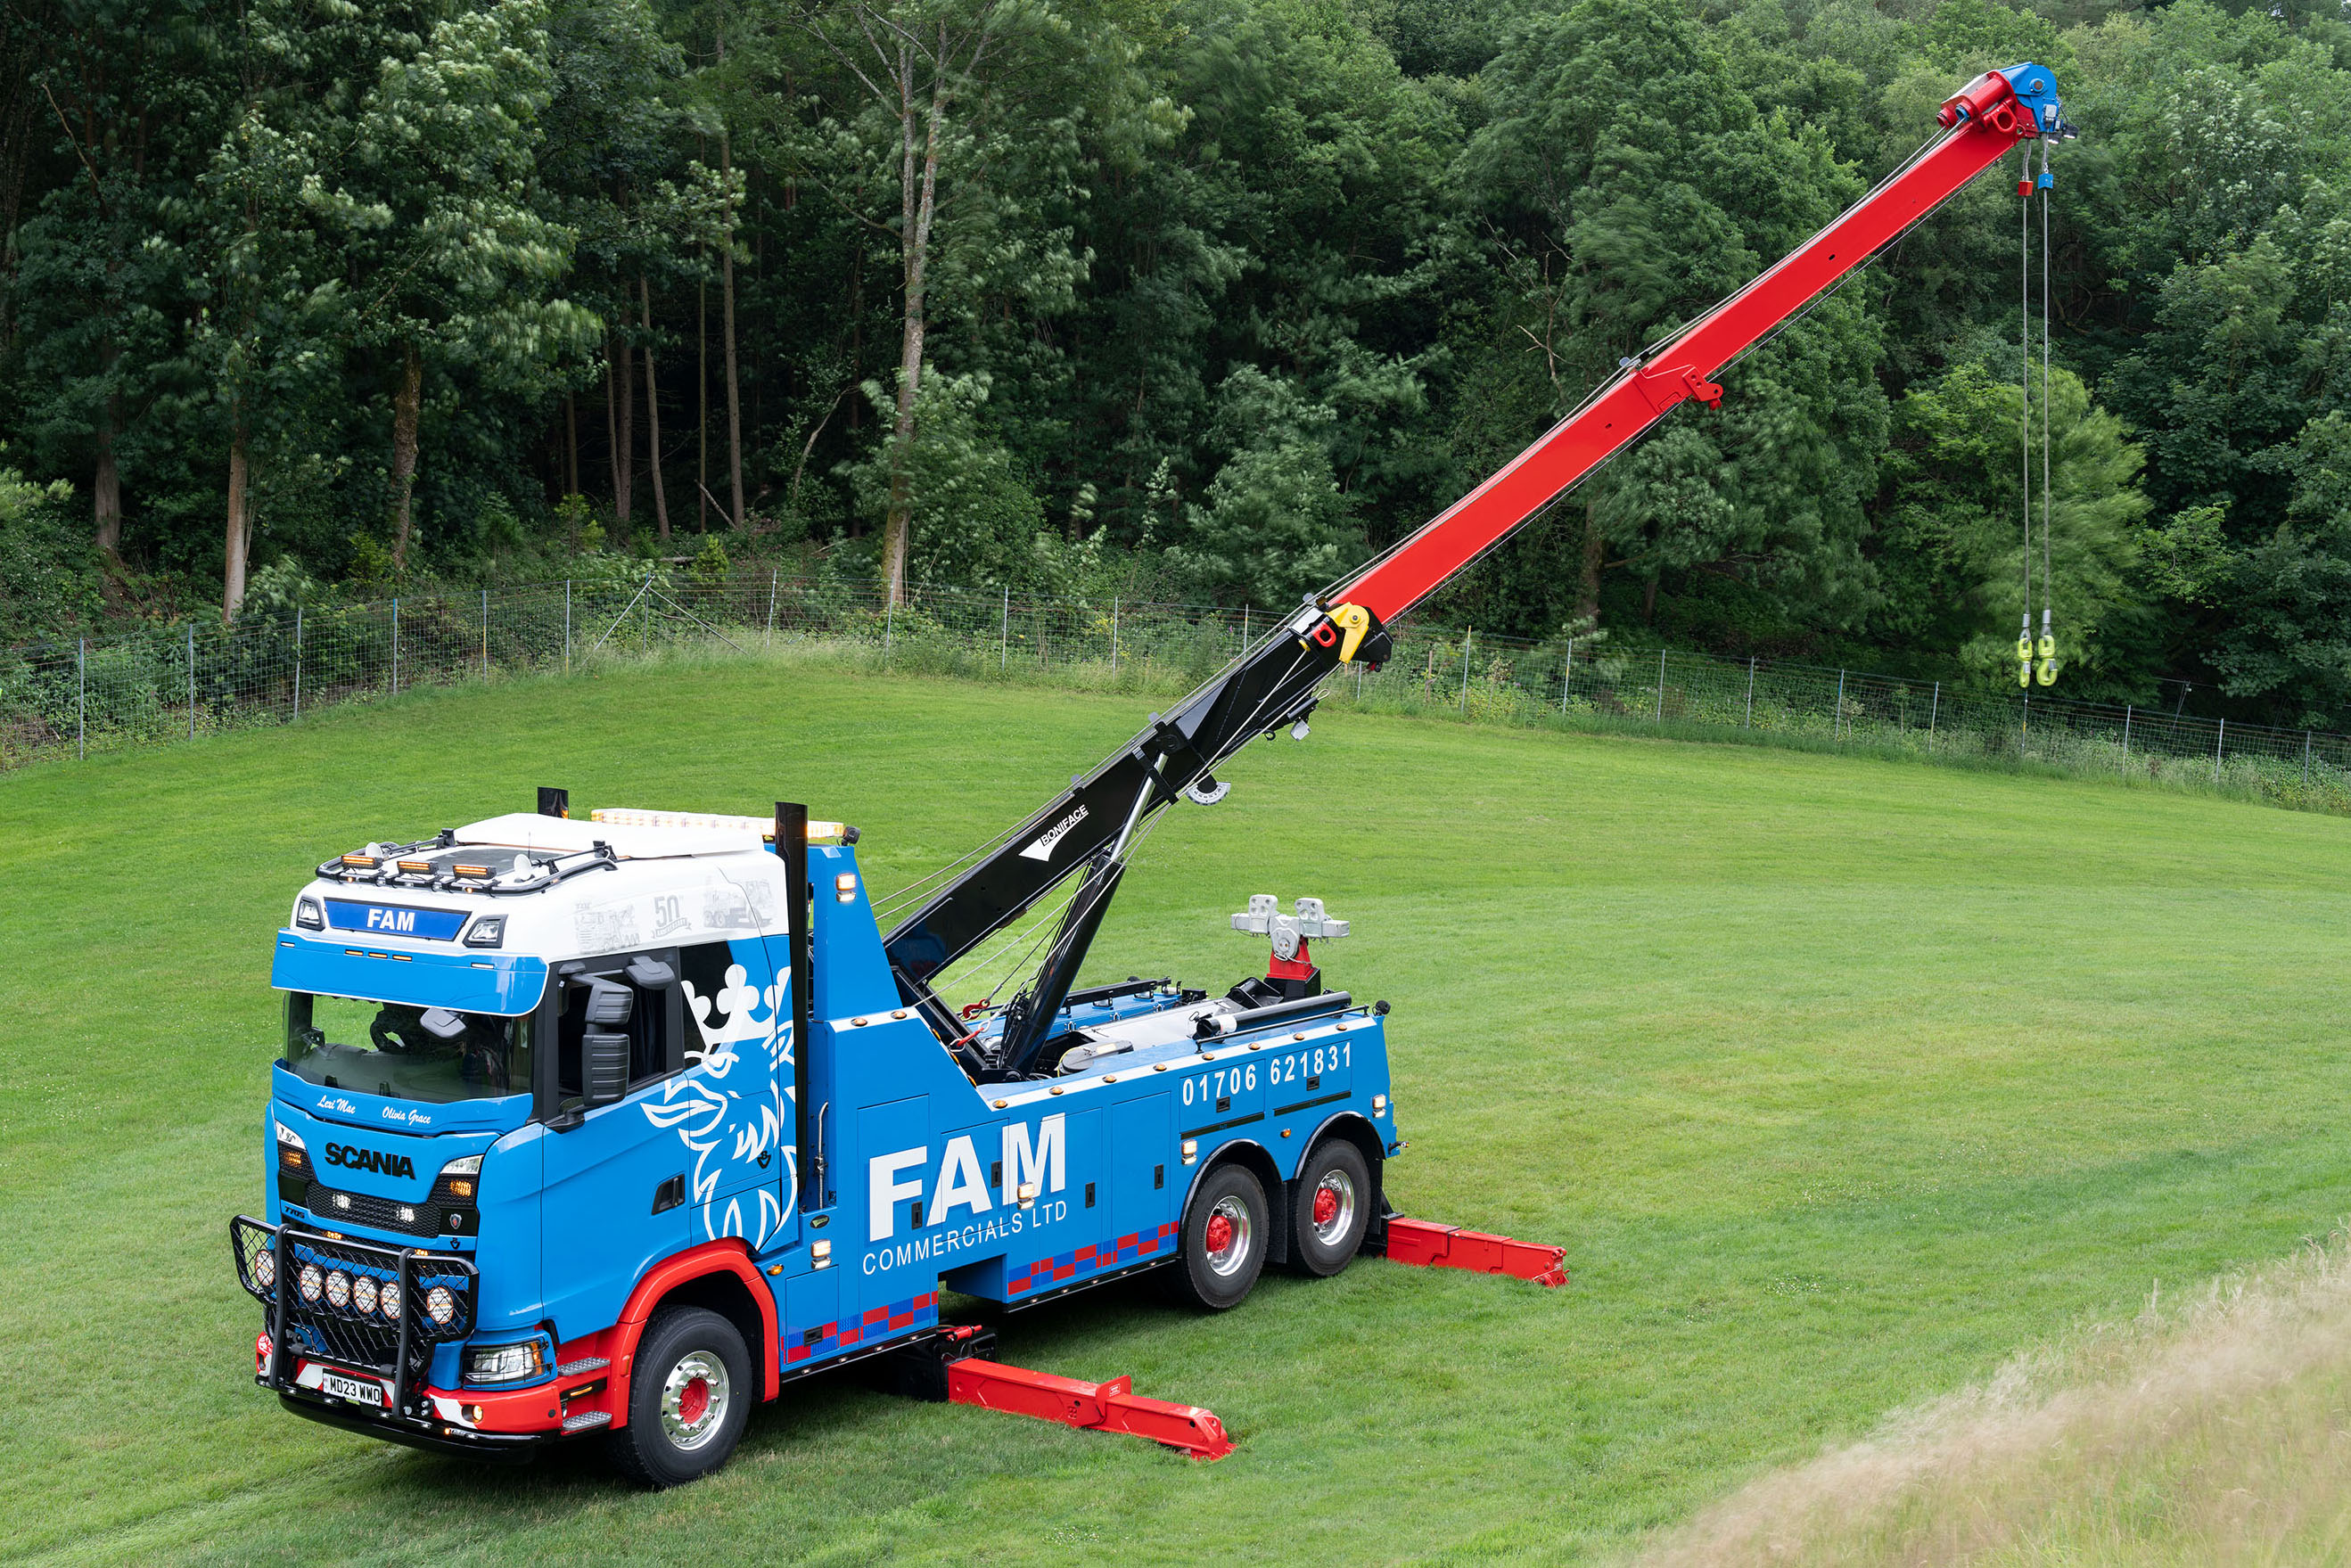 Boniface, Supply, Install and Customise a Century 1140 Rotator for FAM Commercials